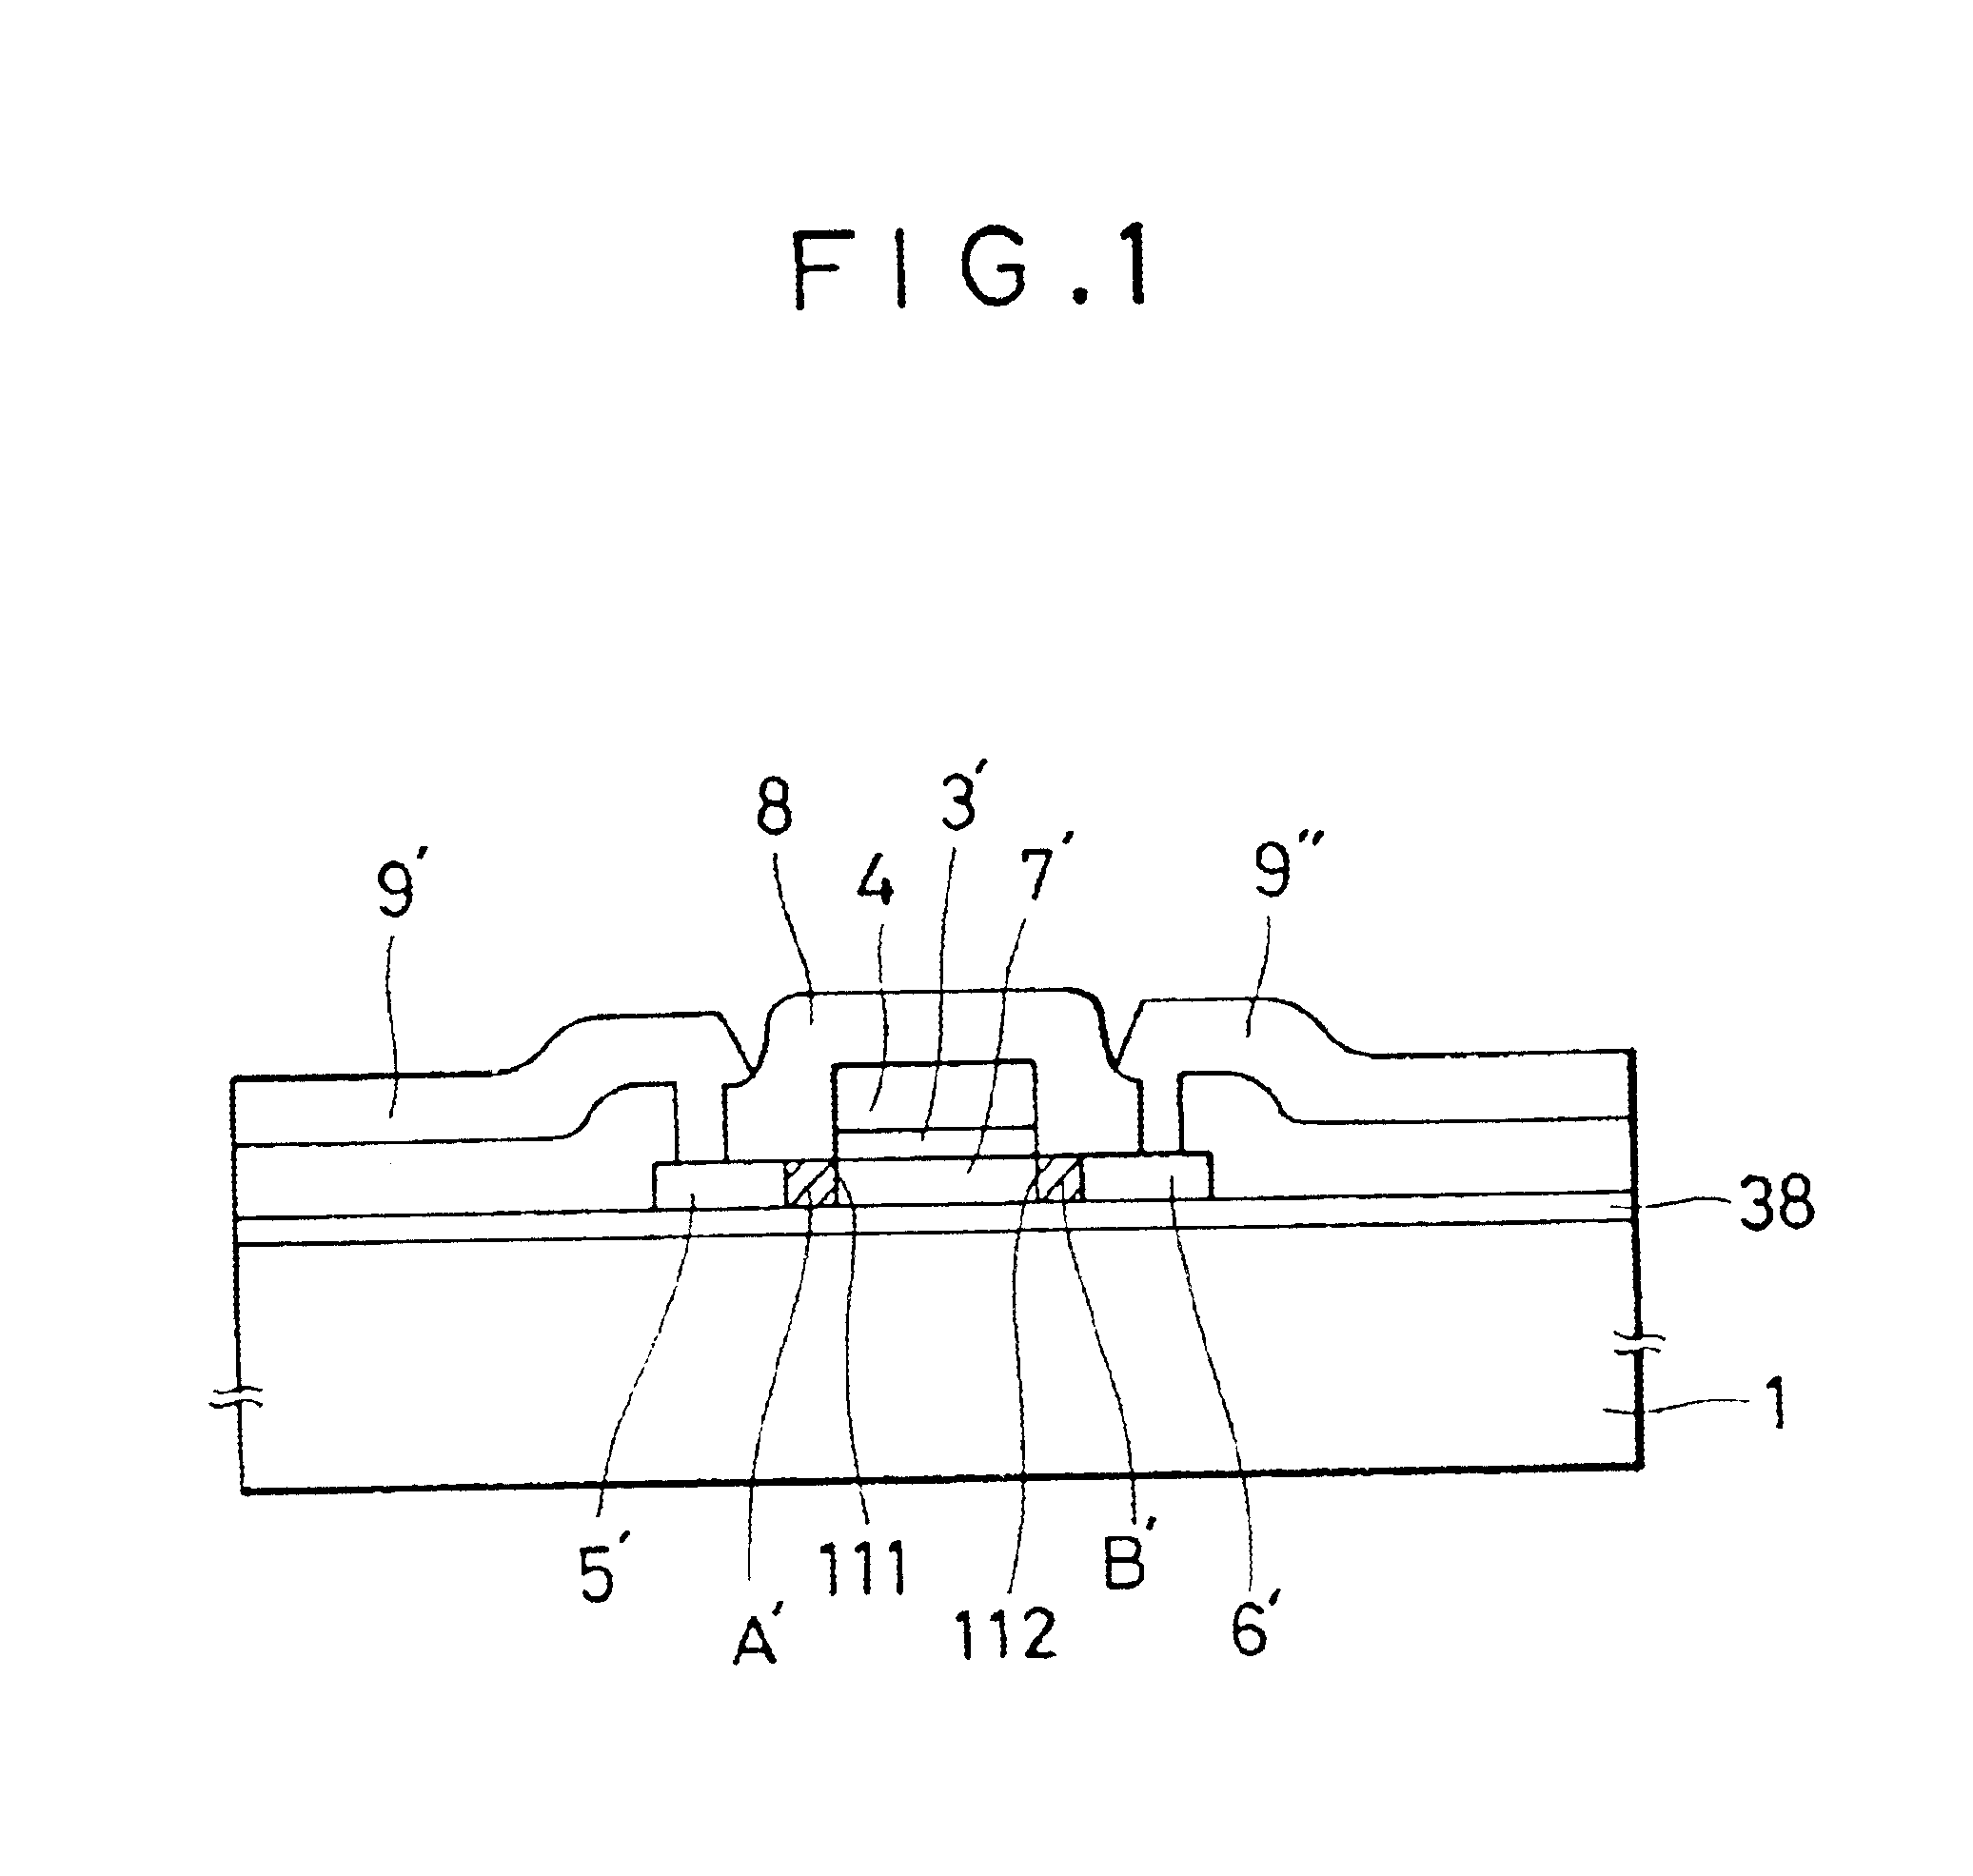 Semiconductor device having source/channel or drain/channel boundary regions